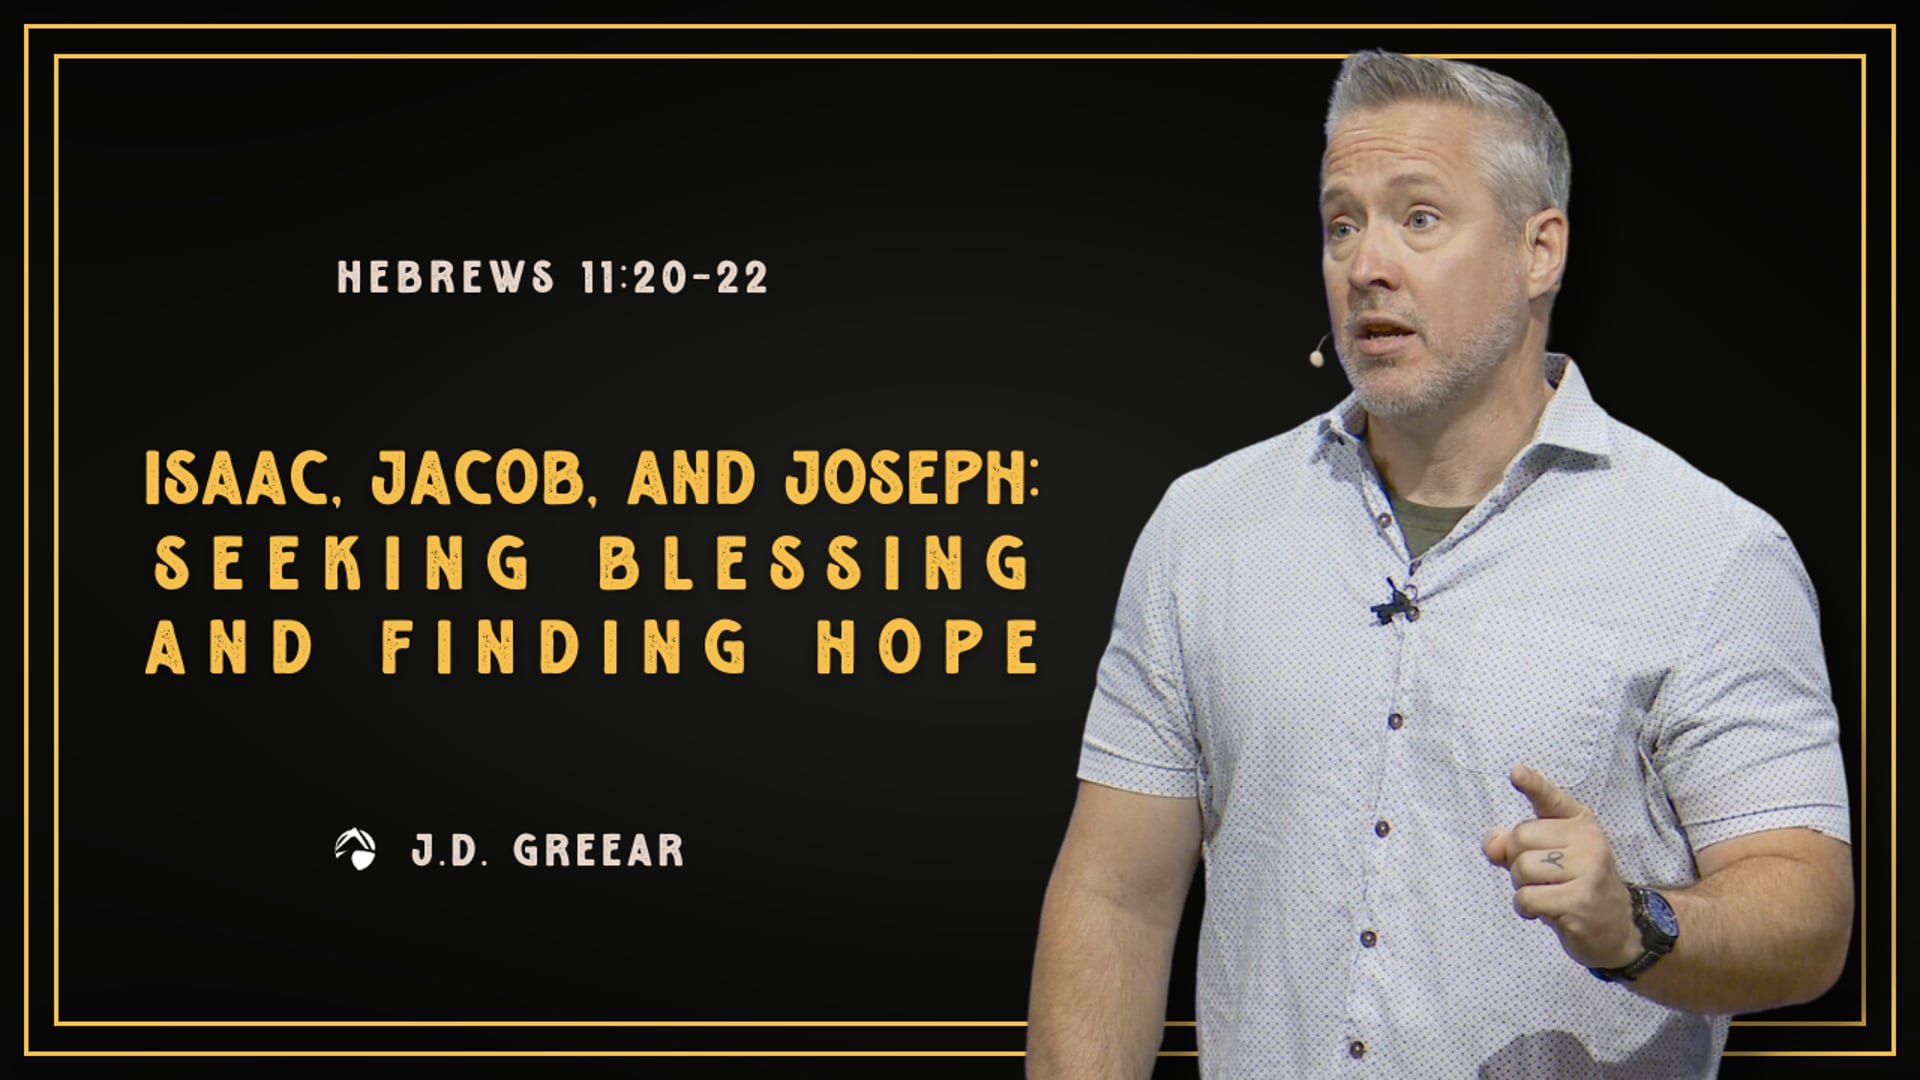 Isaac, Jacob, and Joseph: Seeking Blessing and Finding Hope